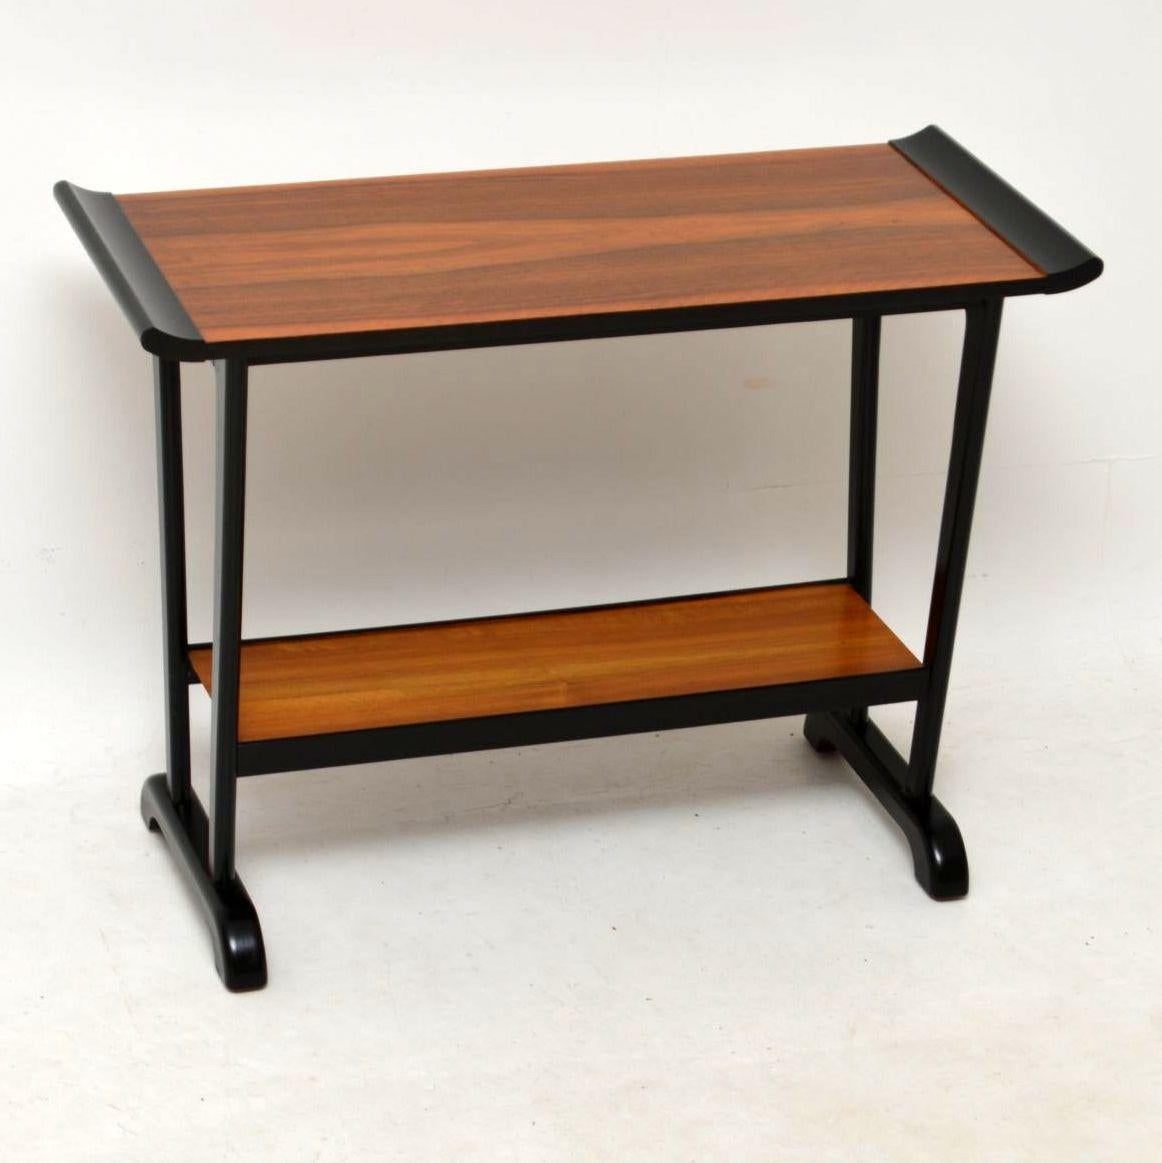 A beautifully designed vintage walnut side table, this dates from the 1960’s. It’s a great size to be used as a TV stand, or side / entry table. We have had this stripped and re-polished to a very high standard, the condition is superb